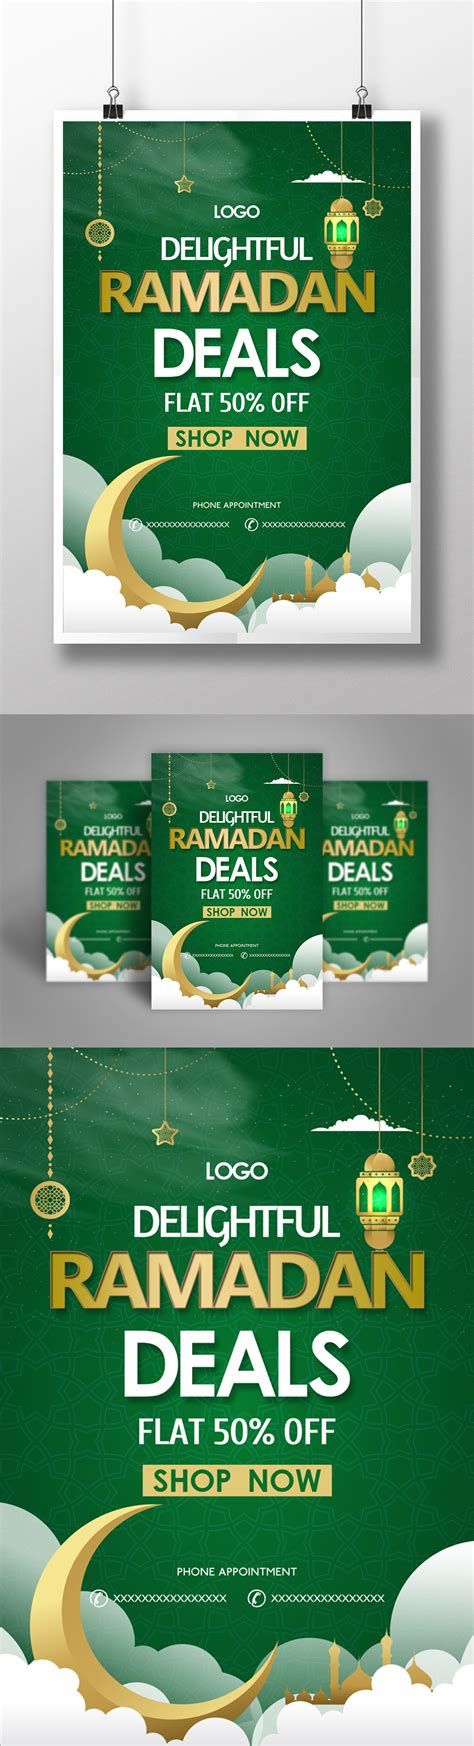 Green Islamic Ramadan Promotion Poster Template Template Imagepicture